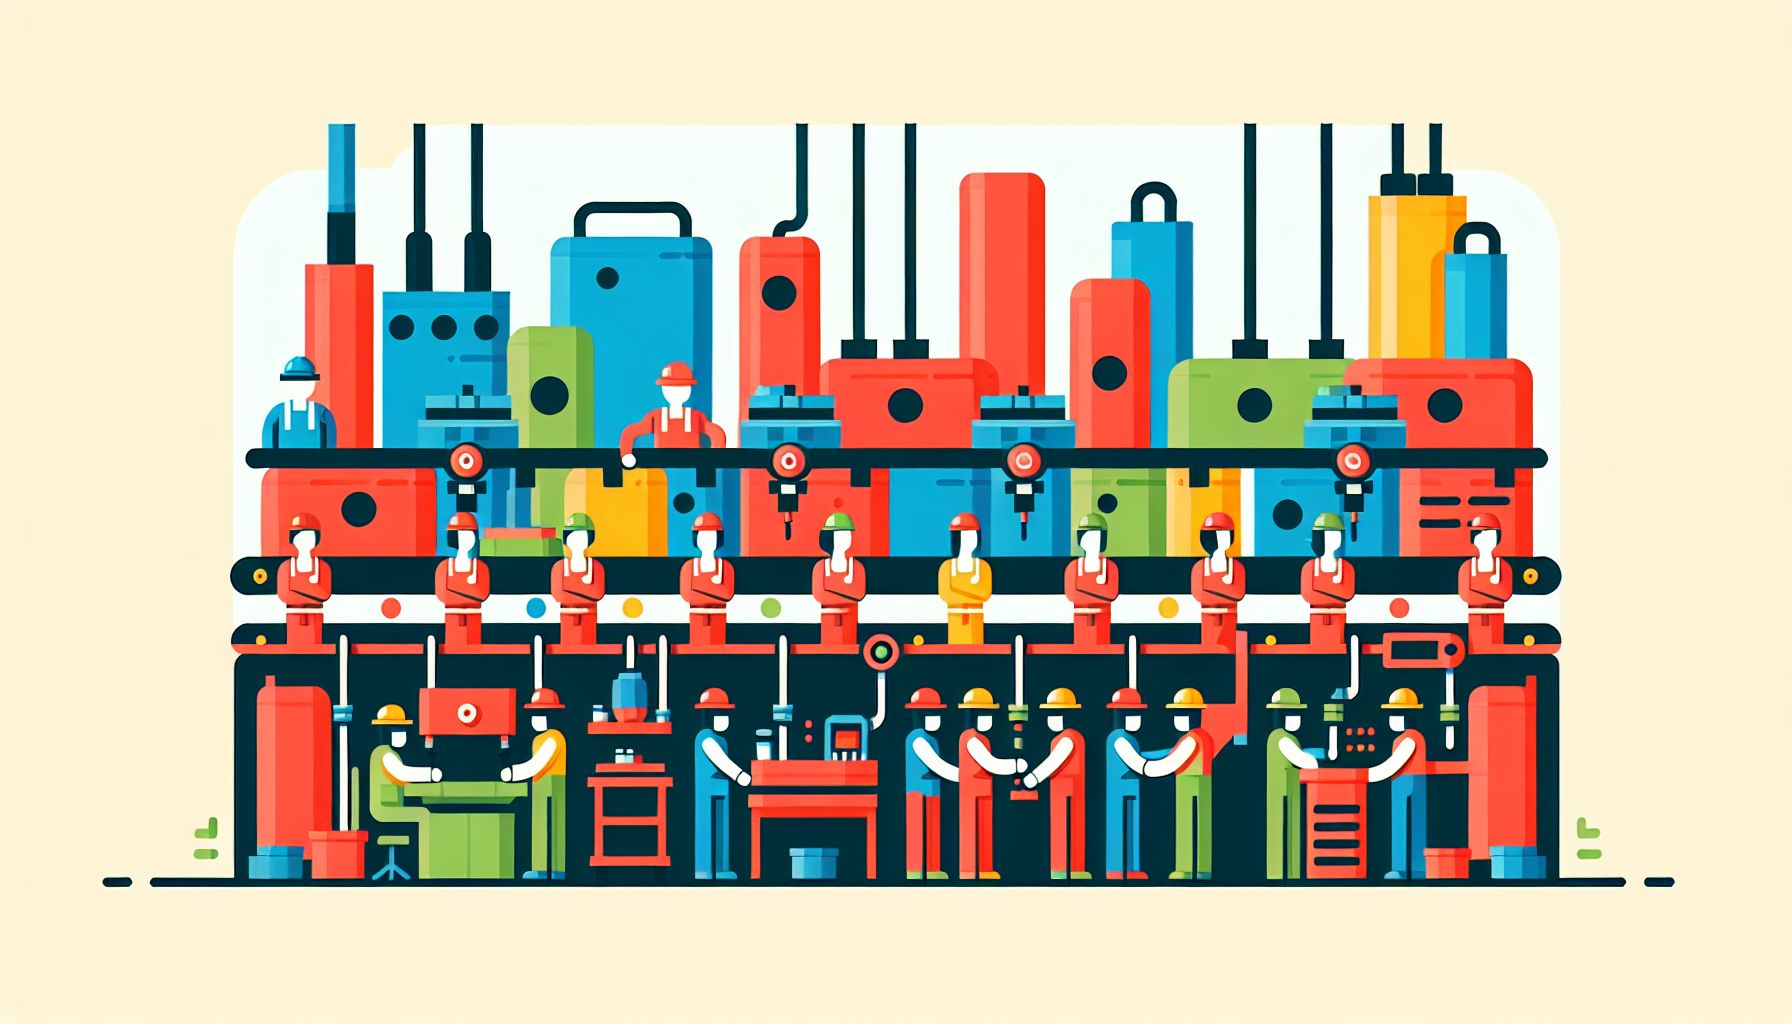 Assembly line in flat illustration style and white background, red #f47574, green #88c7a8, yellow #fcc44b, and blue #645bc8 colors.